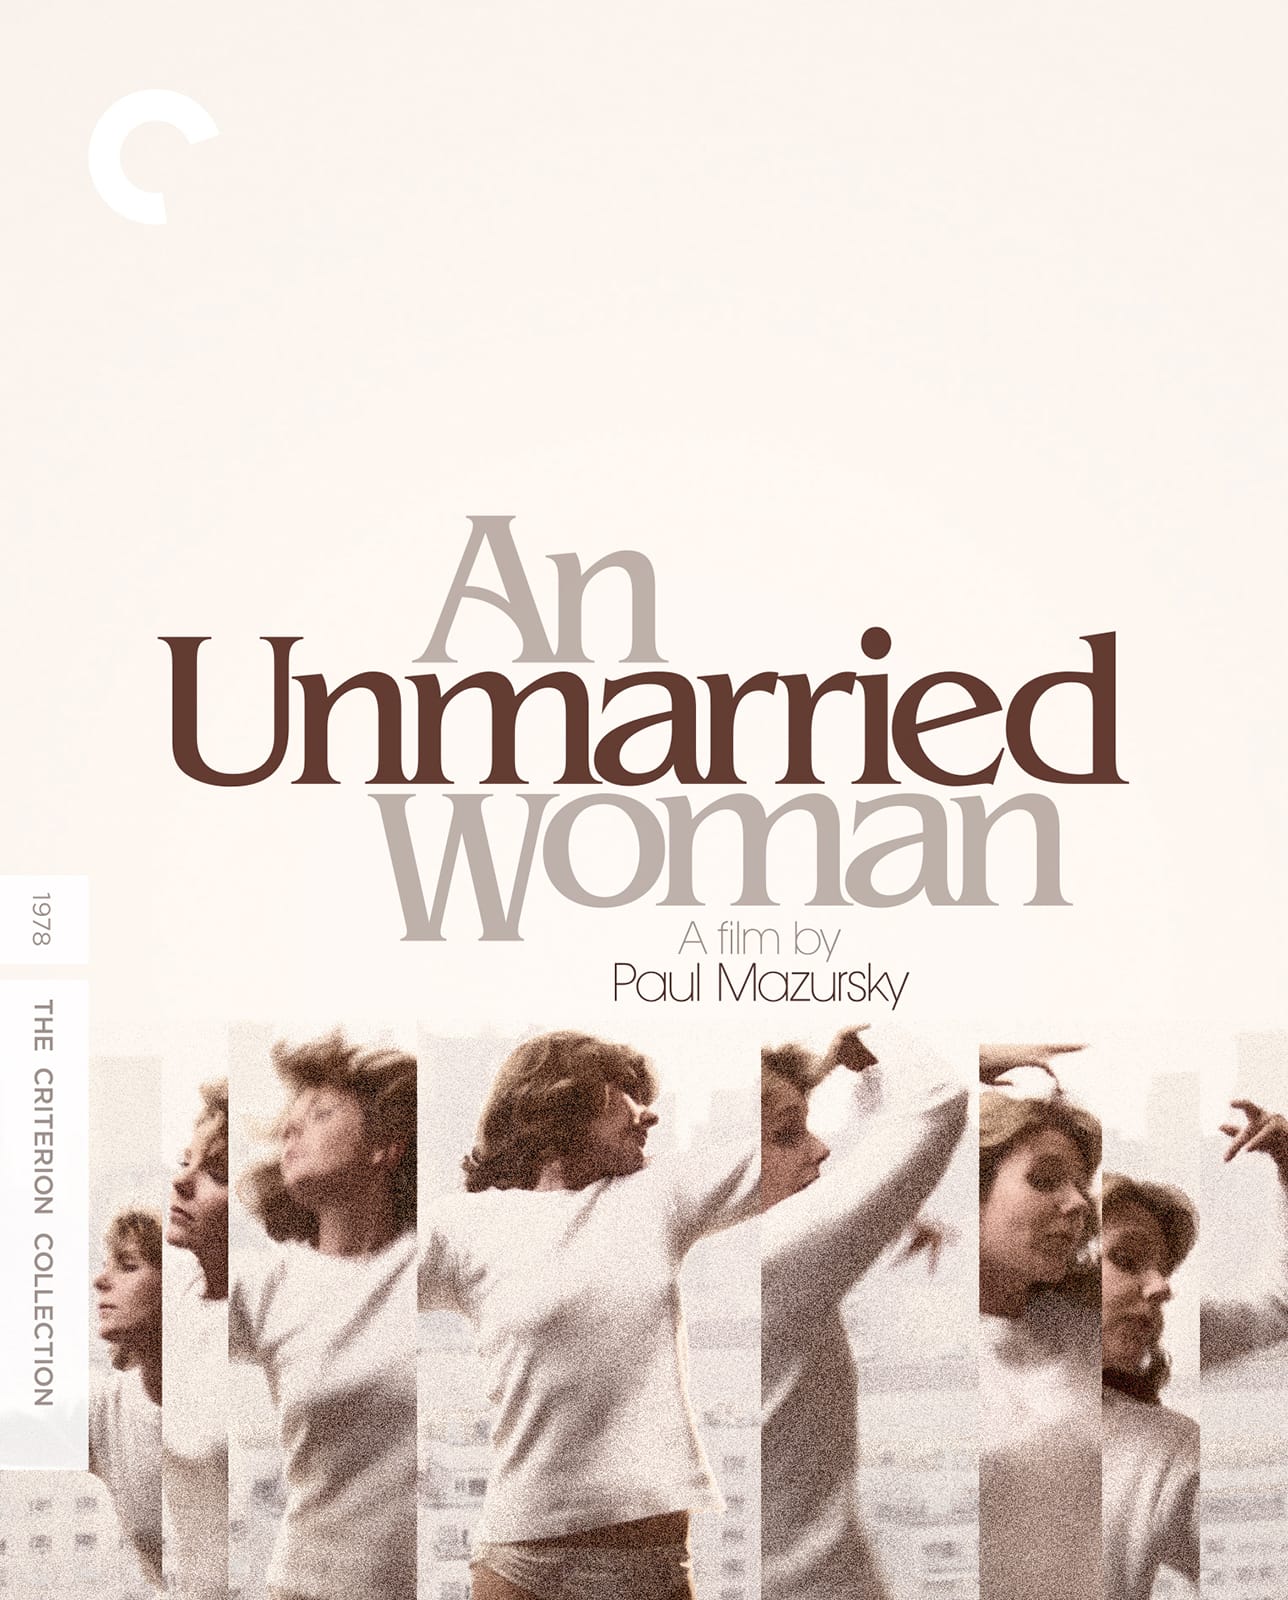 carol teichman recommends unmarried wife movie online pic